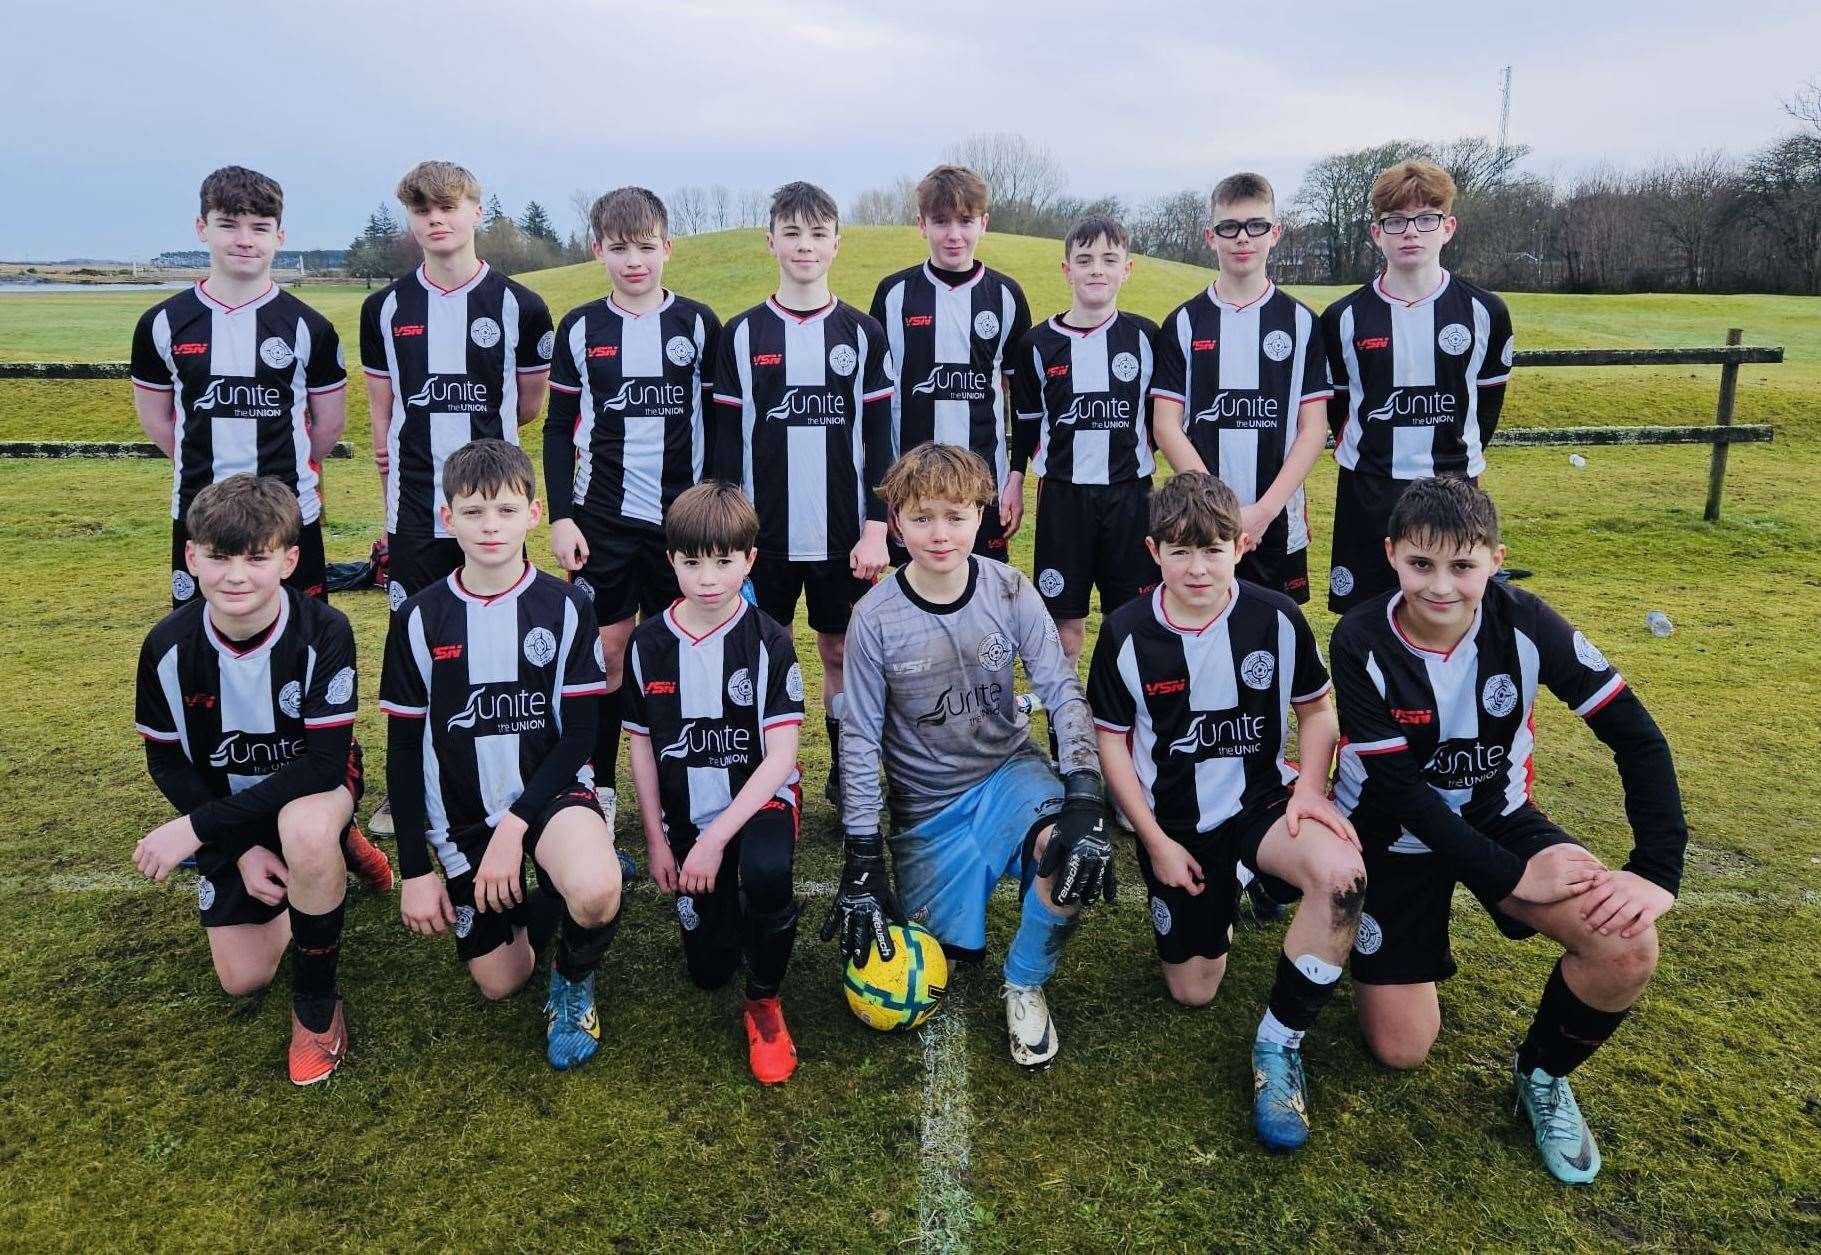 The Caithness United U14 squad who won 3-2 against Tain Juniors.